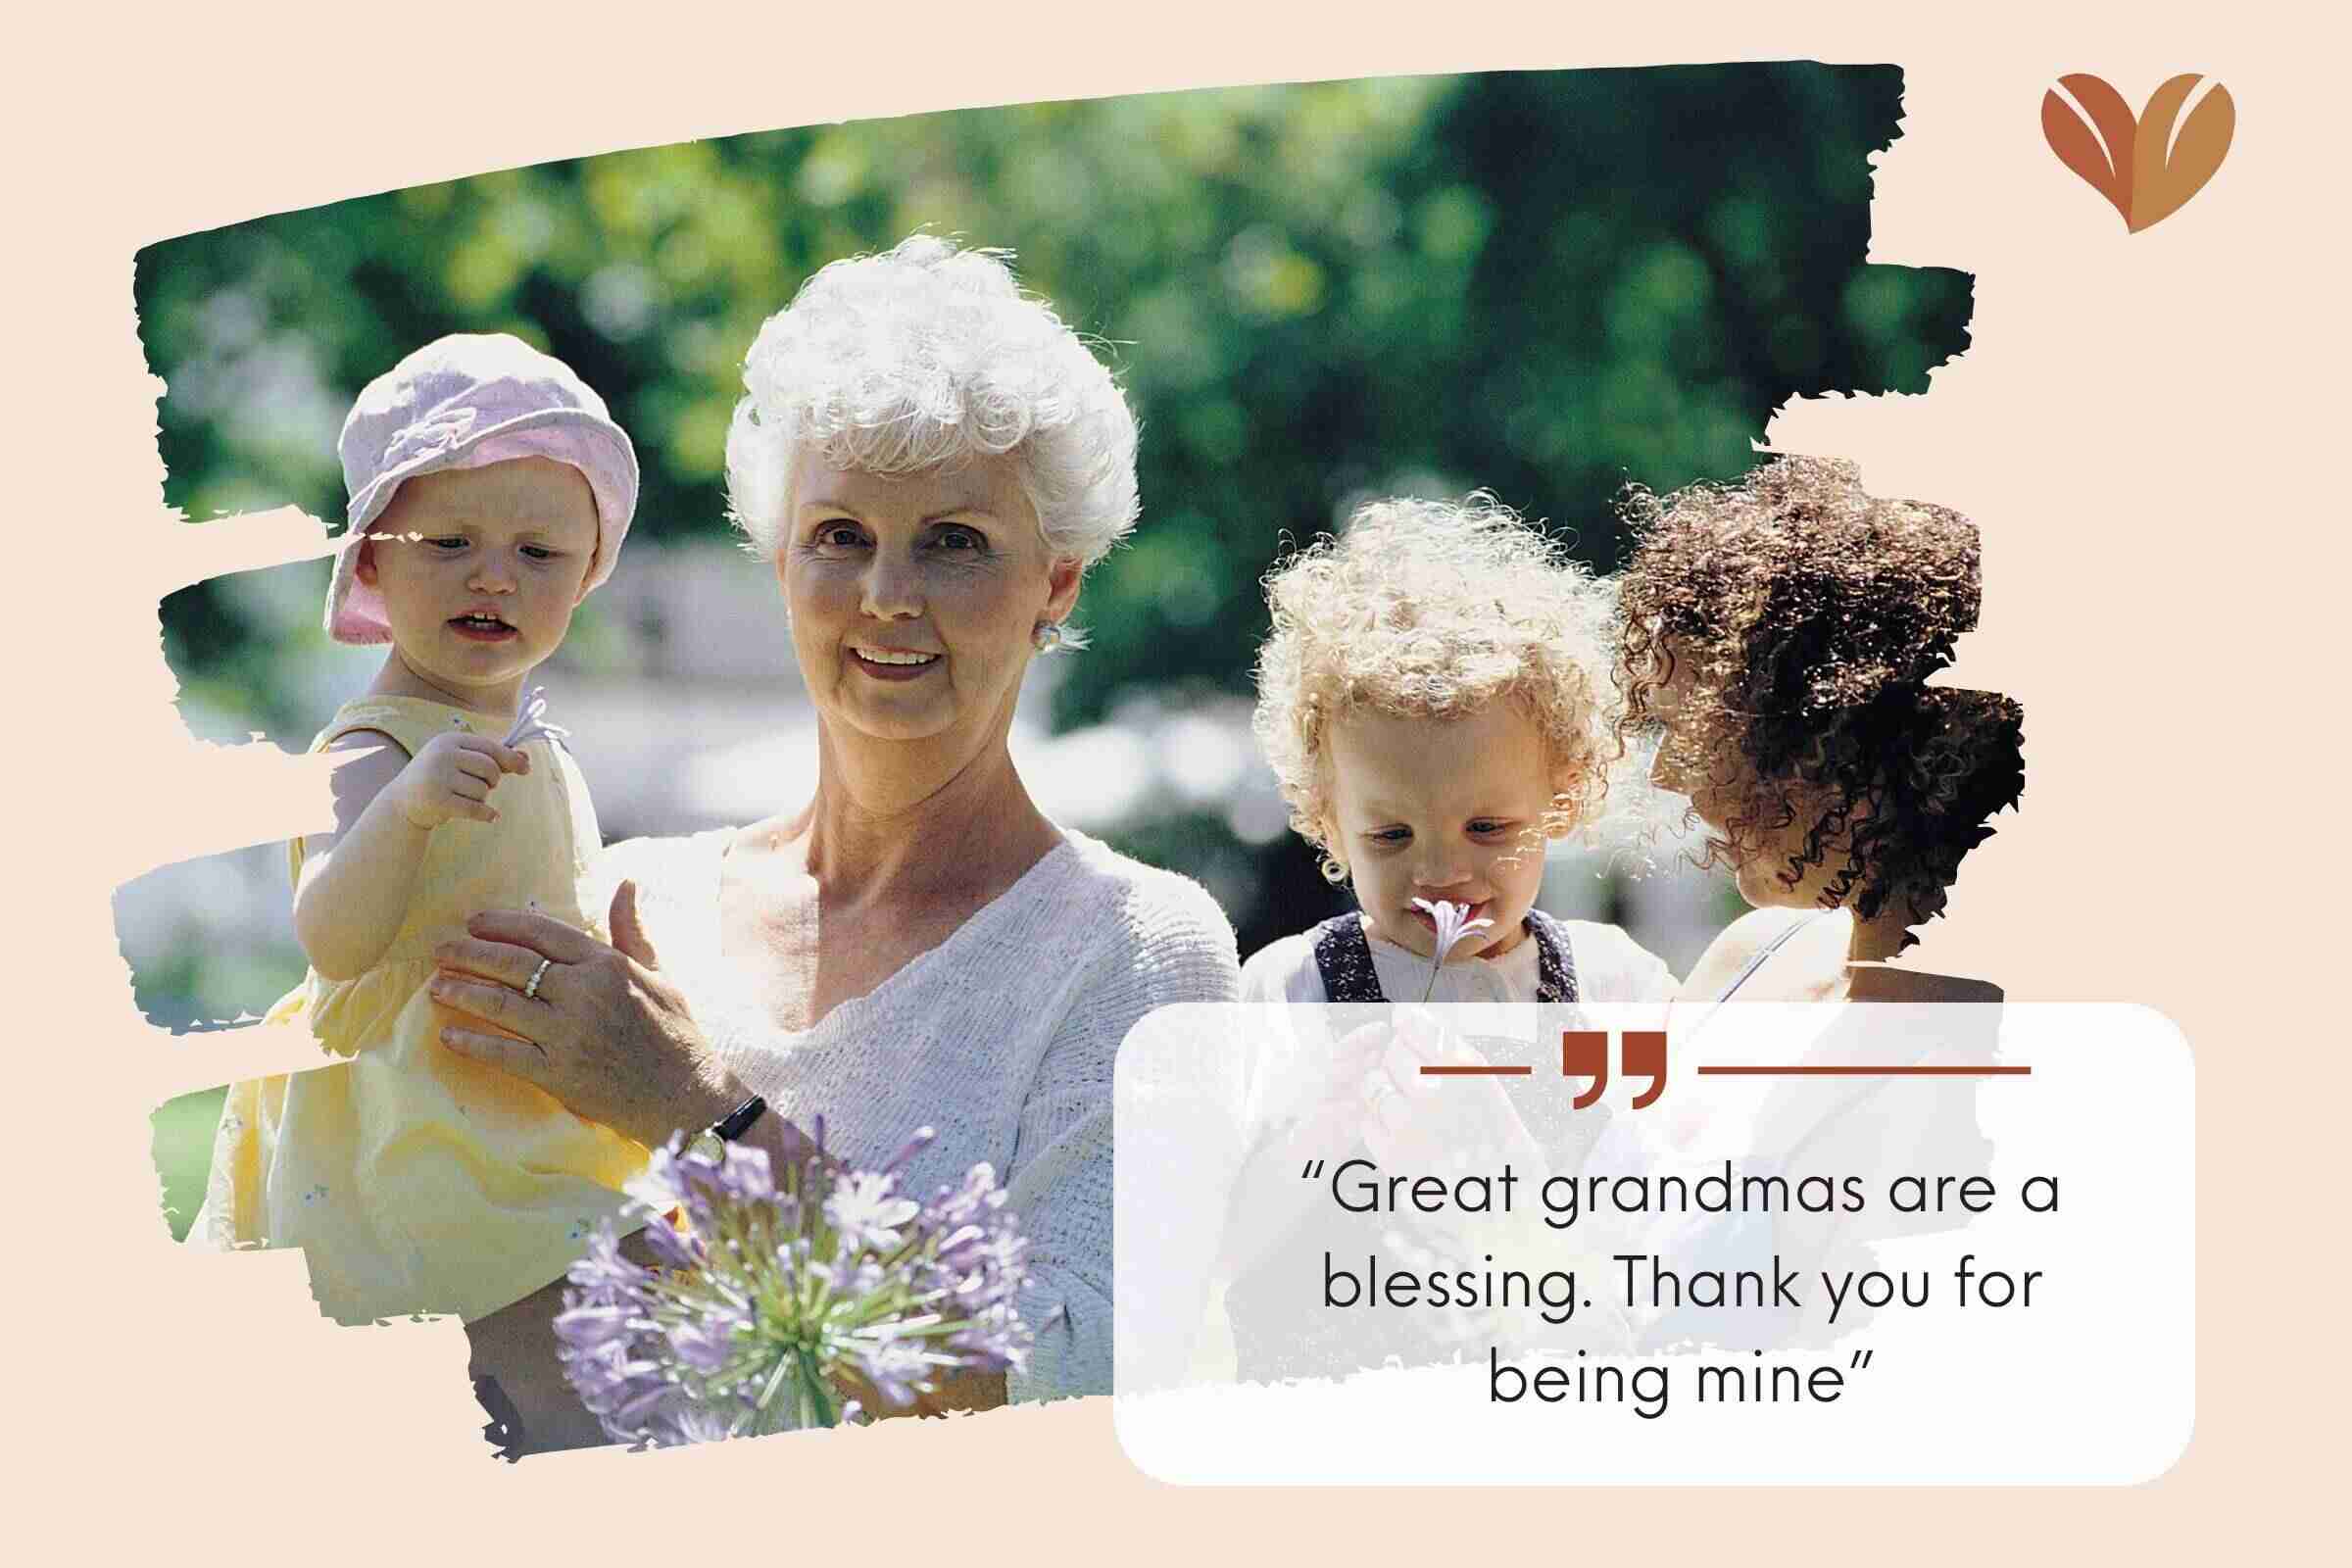 What to Write in Card a Mother's Day Messages for Great Grandma from the Heart